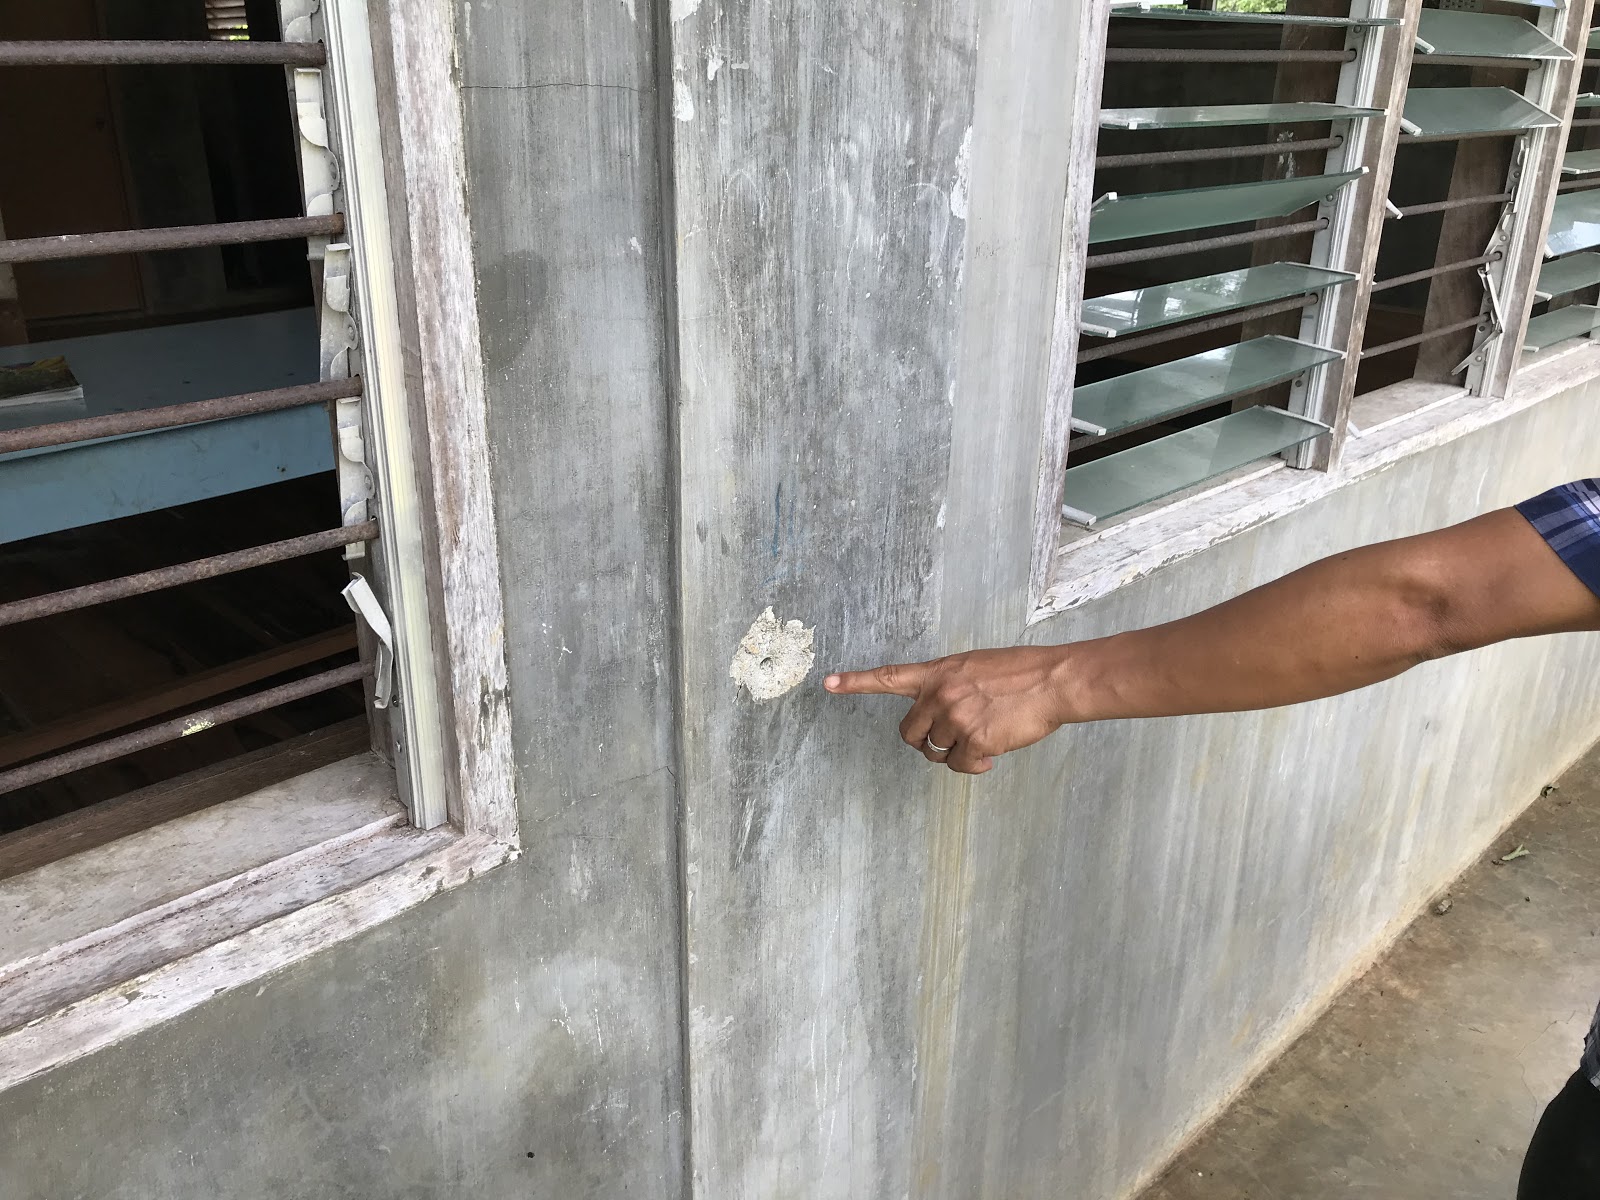 One of many bullet holes that remain in a Lumad indigenous school after the Lianga Massacre, carried out by paramilitaries and the Armed Forces of the Philippines, funded by U.S. tax dollars. -Liberation News Photo